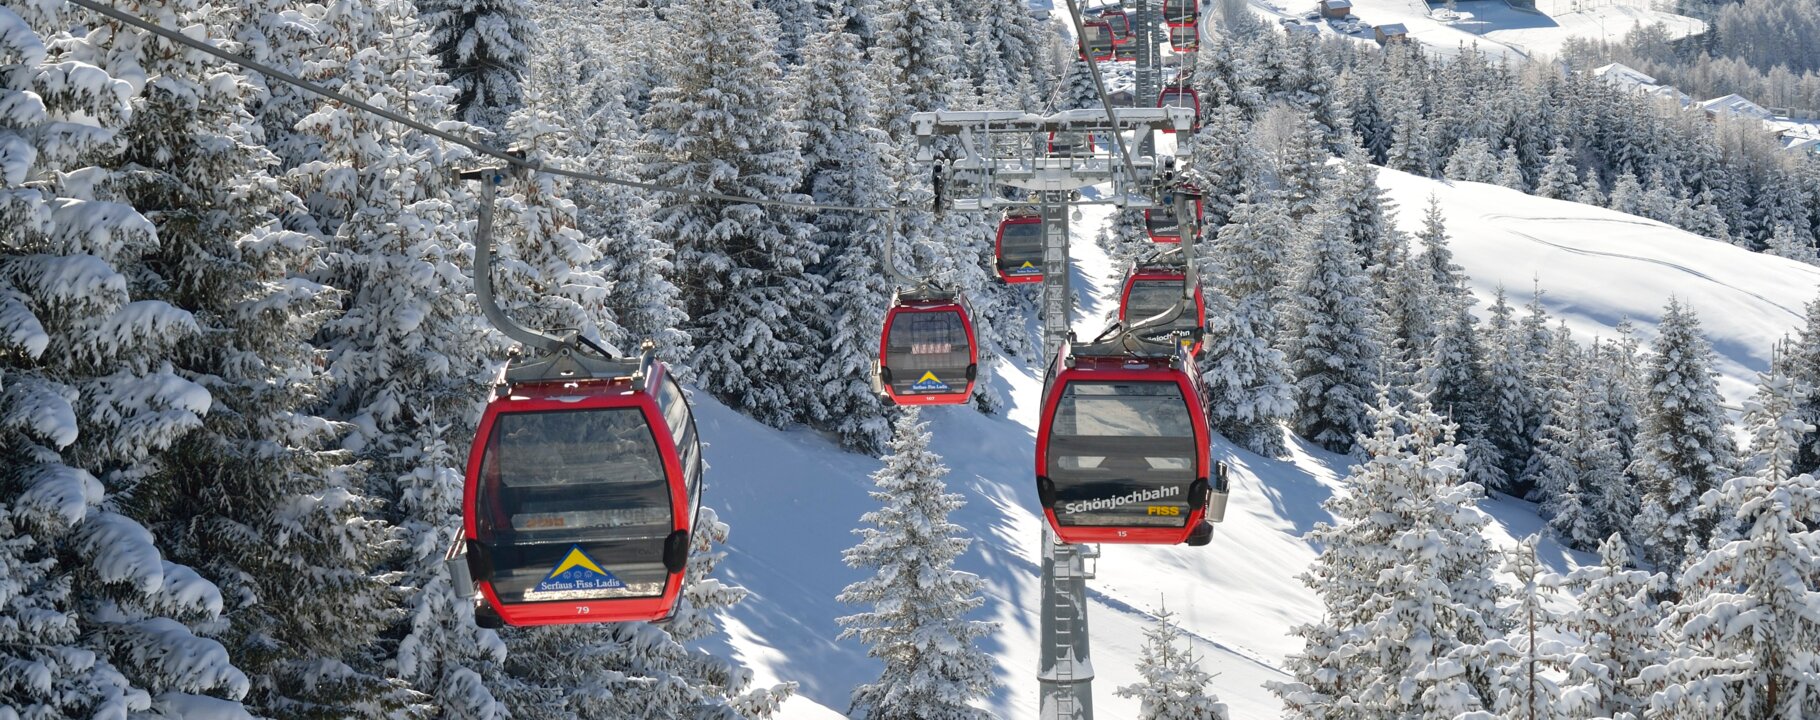 cable cars of Schönjochbahn in Serfaus-Fiss-Ladis